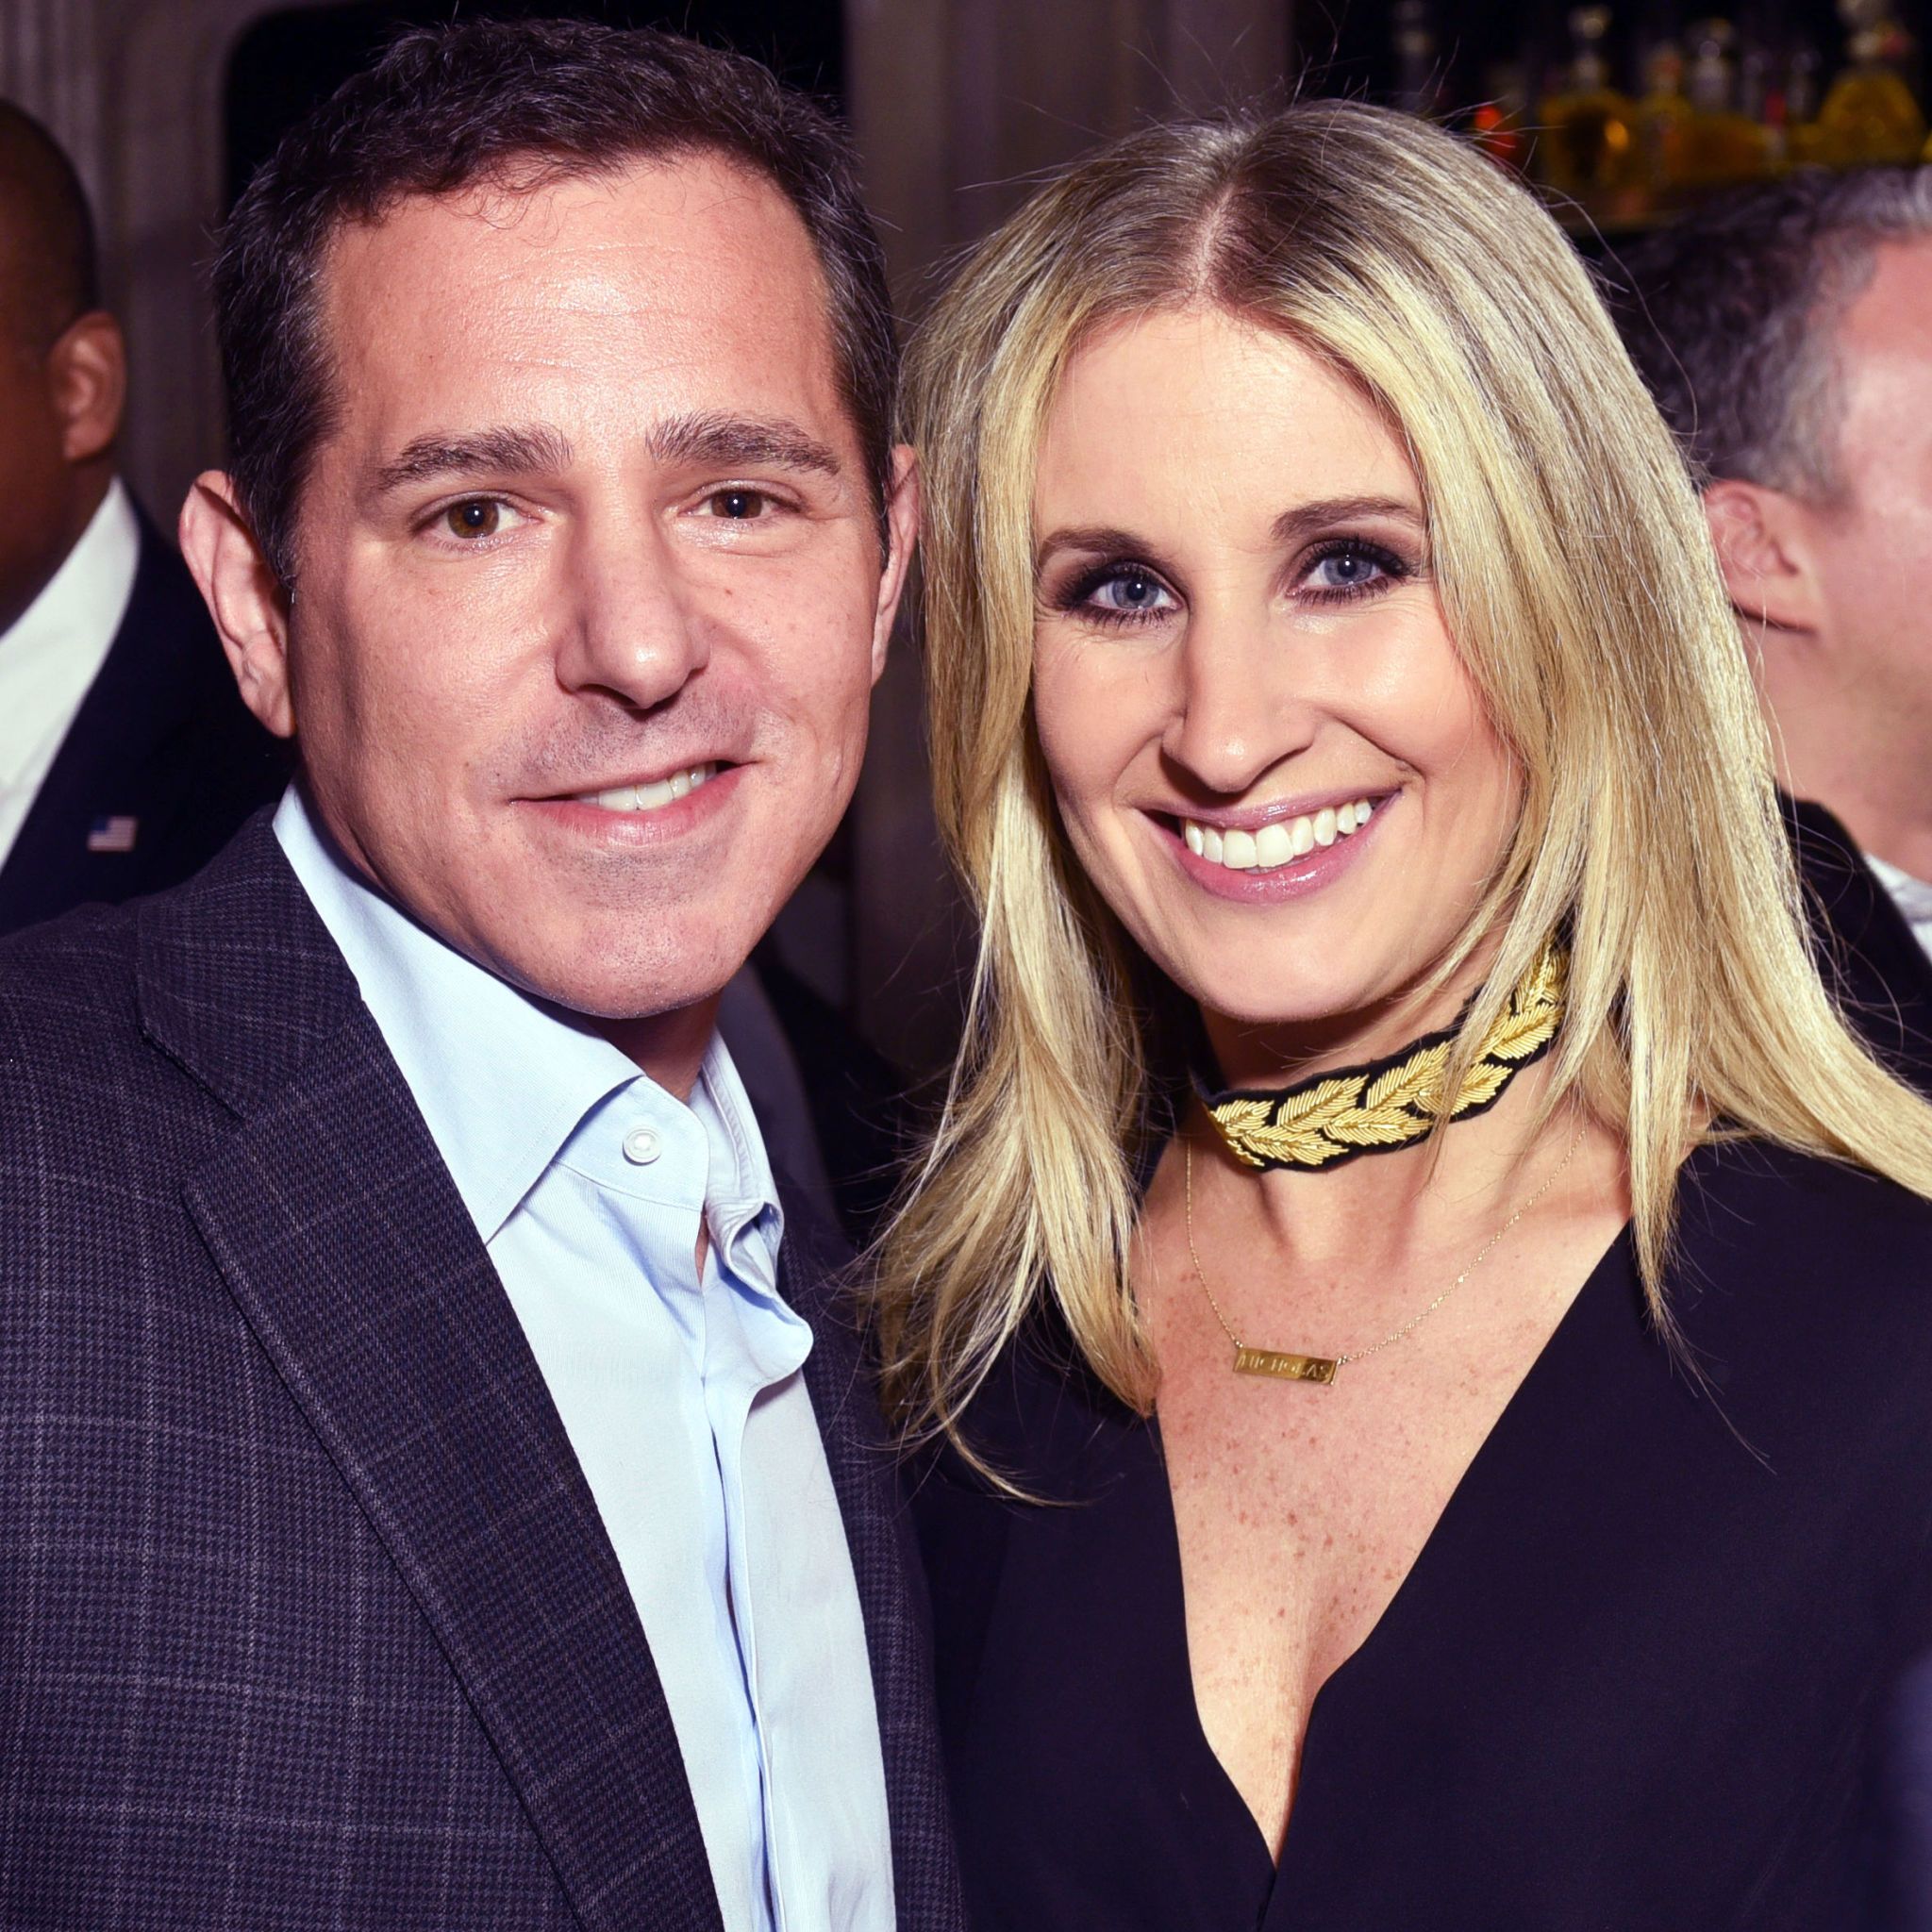 Anthony Scaramuccis Wife, Deidre Ball, Has Reportedly Filed for Divorce Marie Claire image